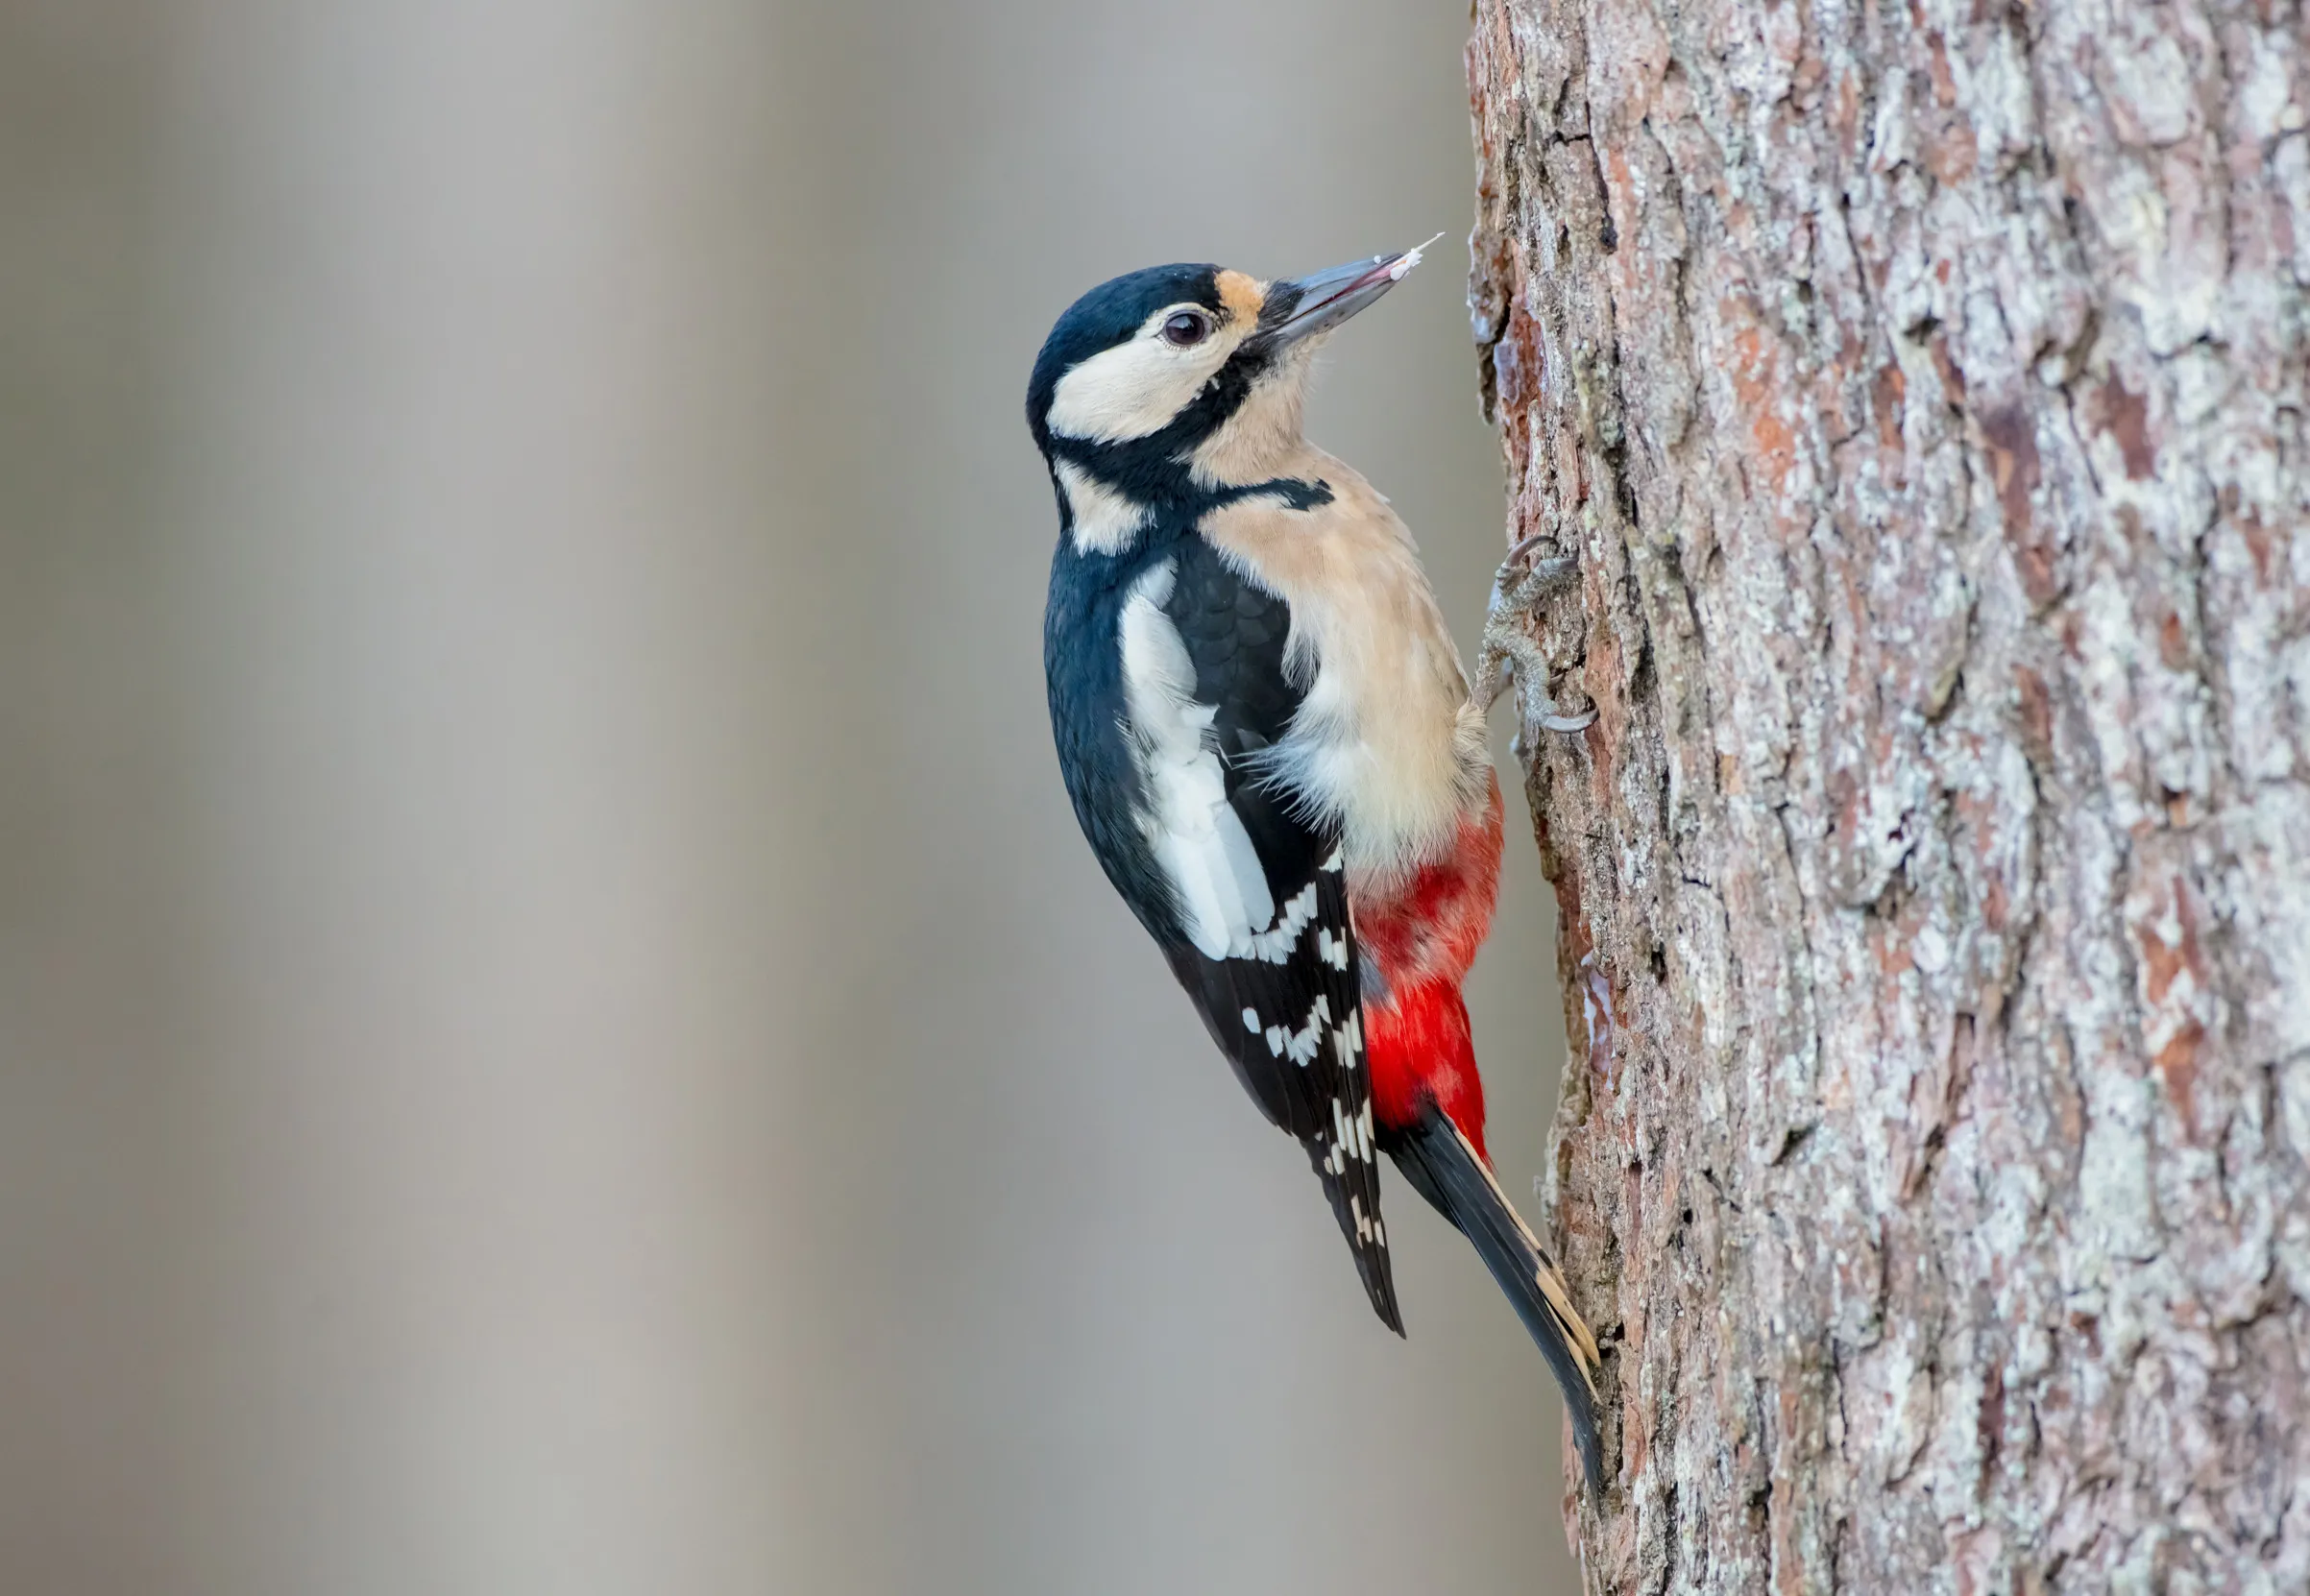 A female Great Spotted Woodpecker pecking on the side of a tree.